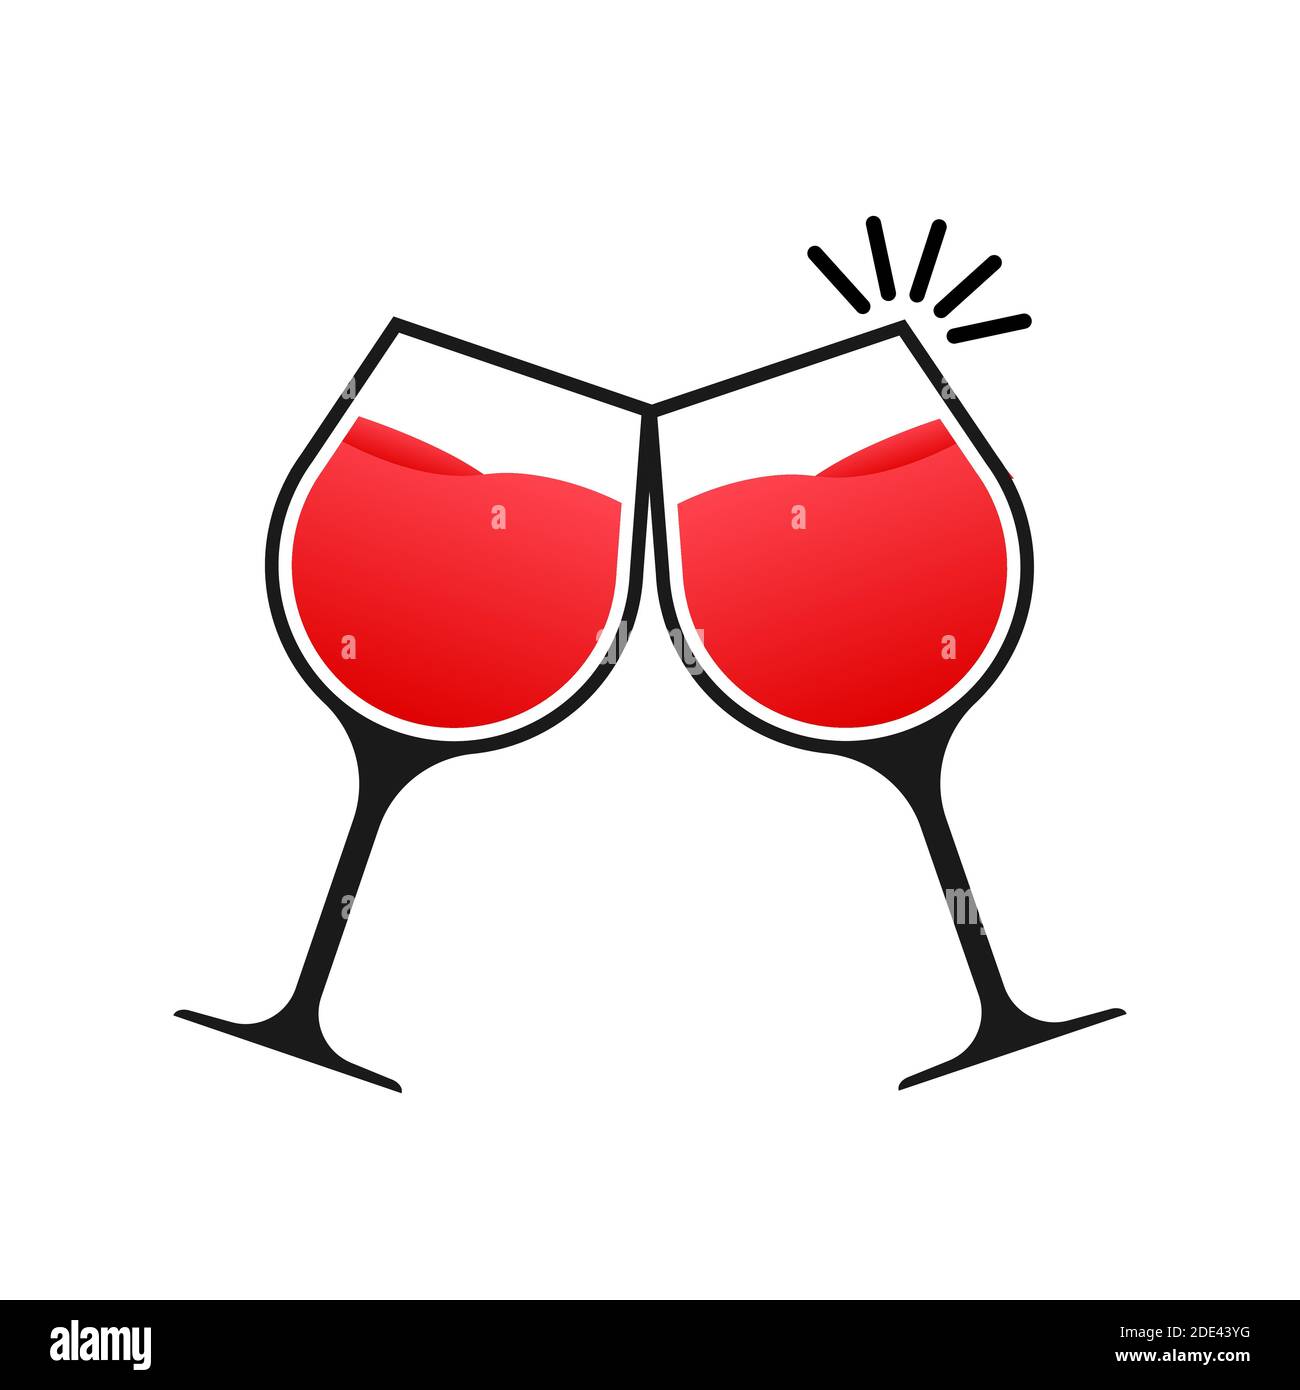 The wineglass icon. Goblet symbol. Vector stock illustration Stock Vector